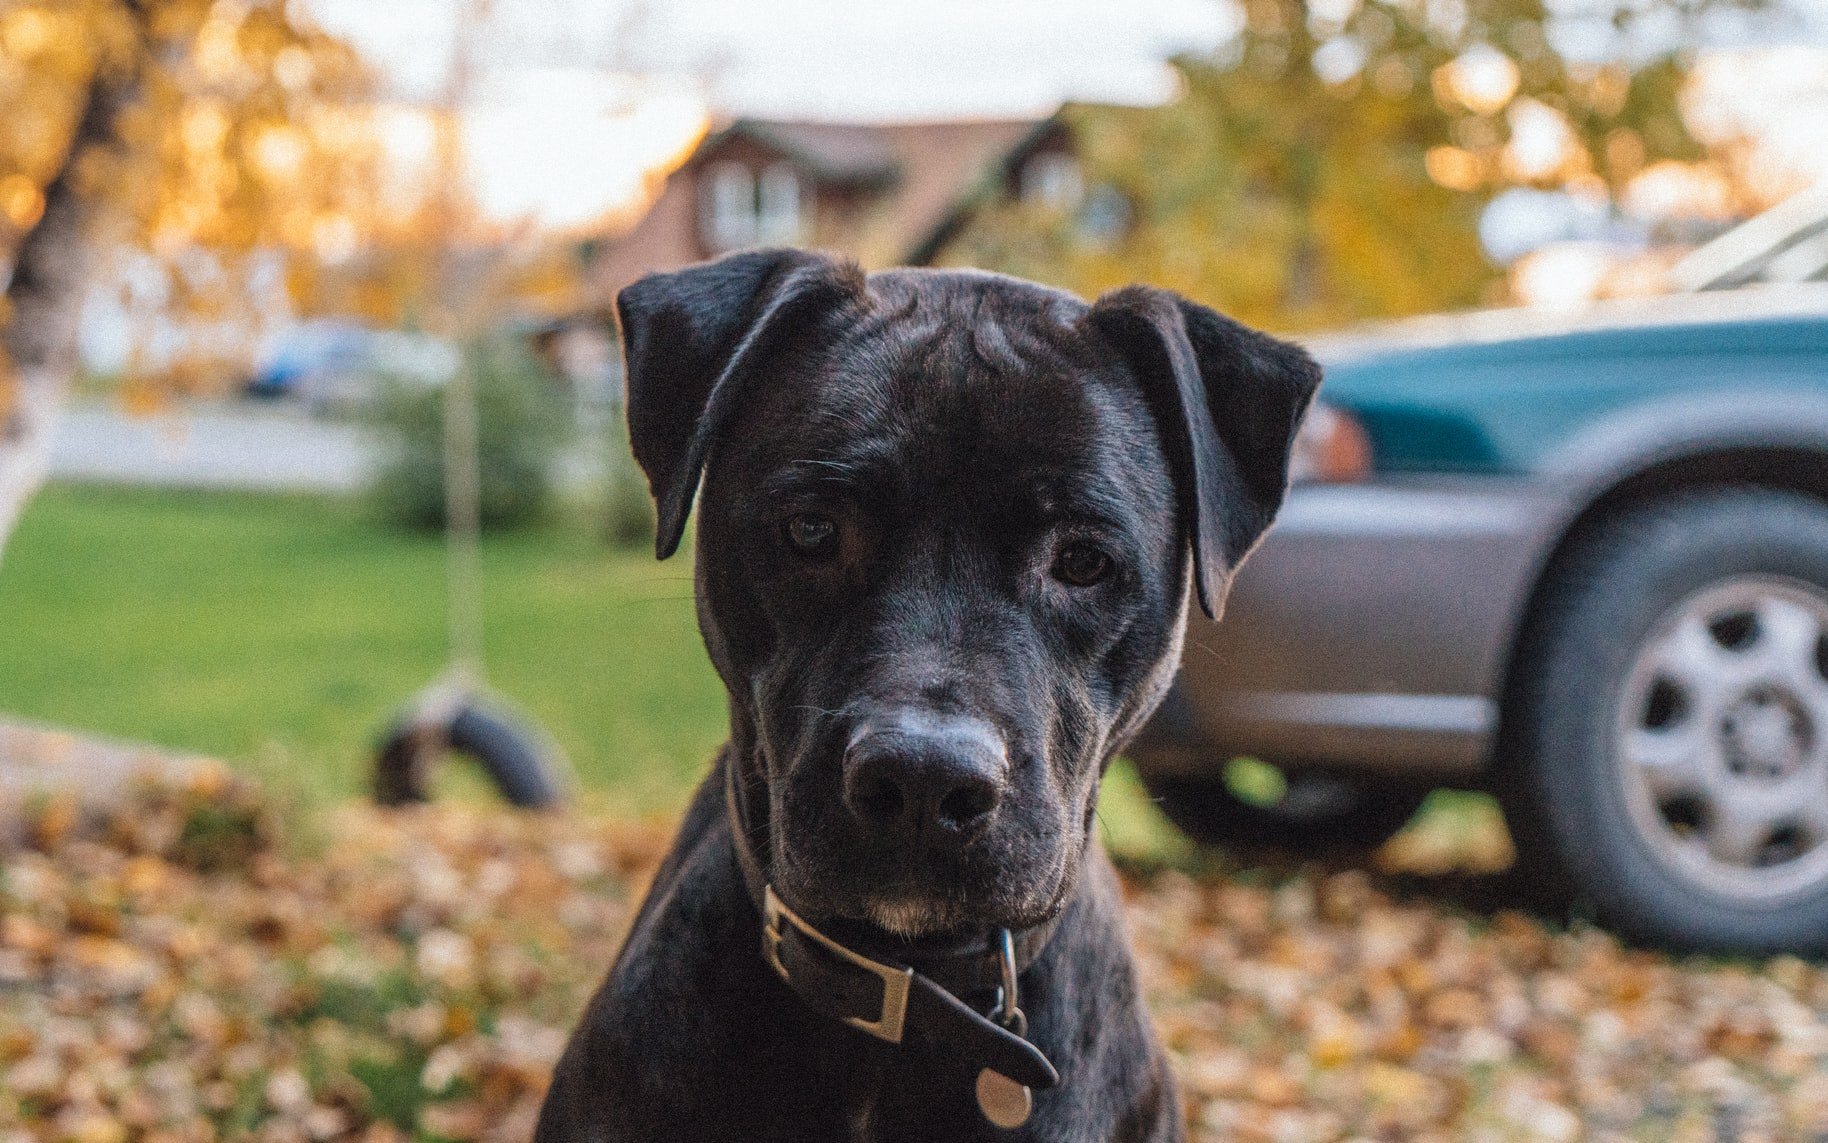 A pup sitting on the field covered with withered leaves.  |  Source: Unsplash